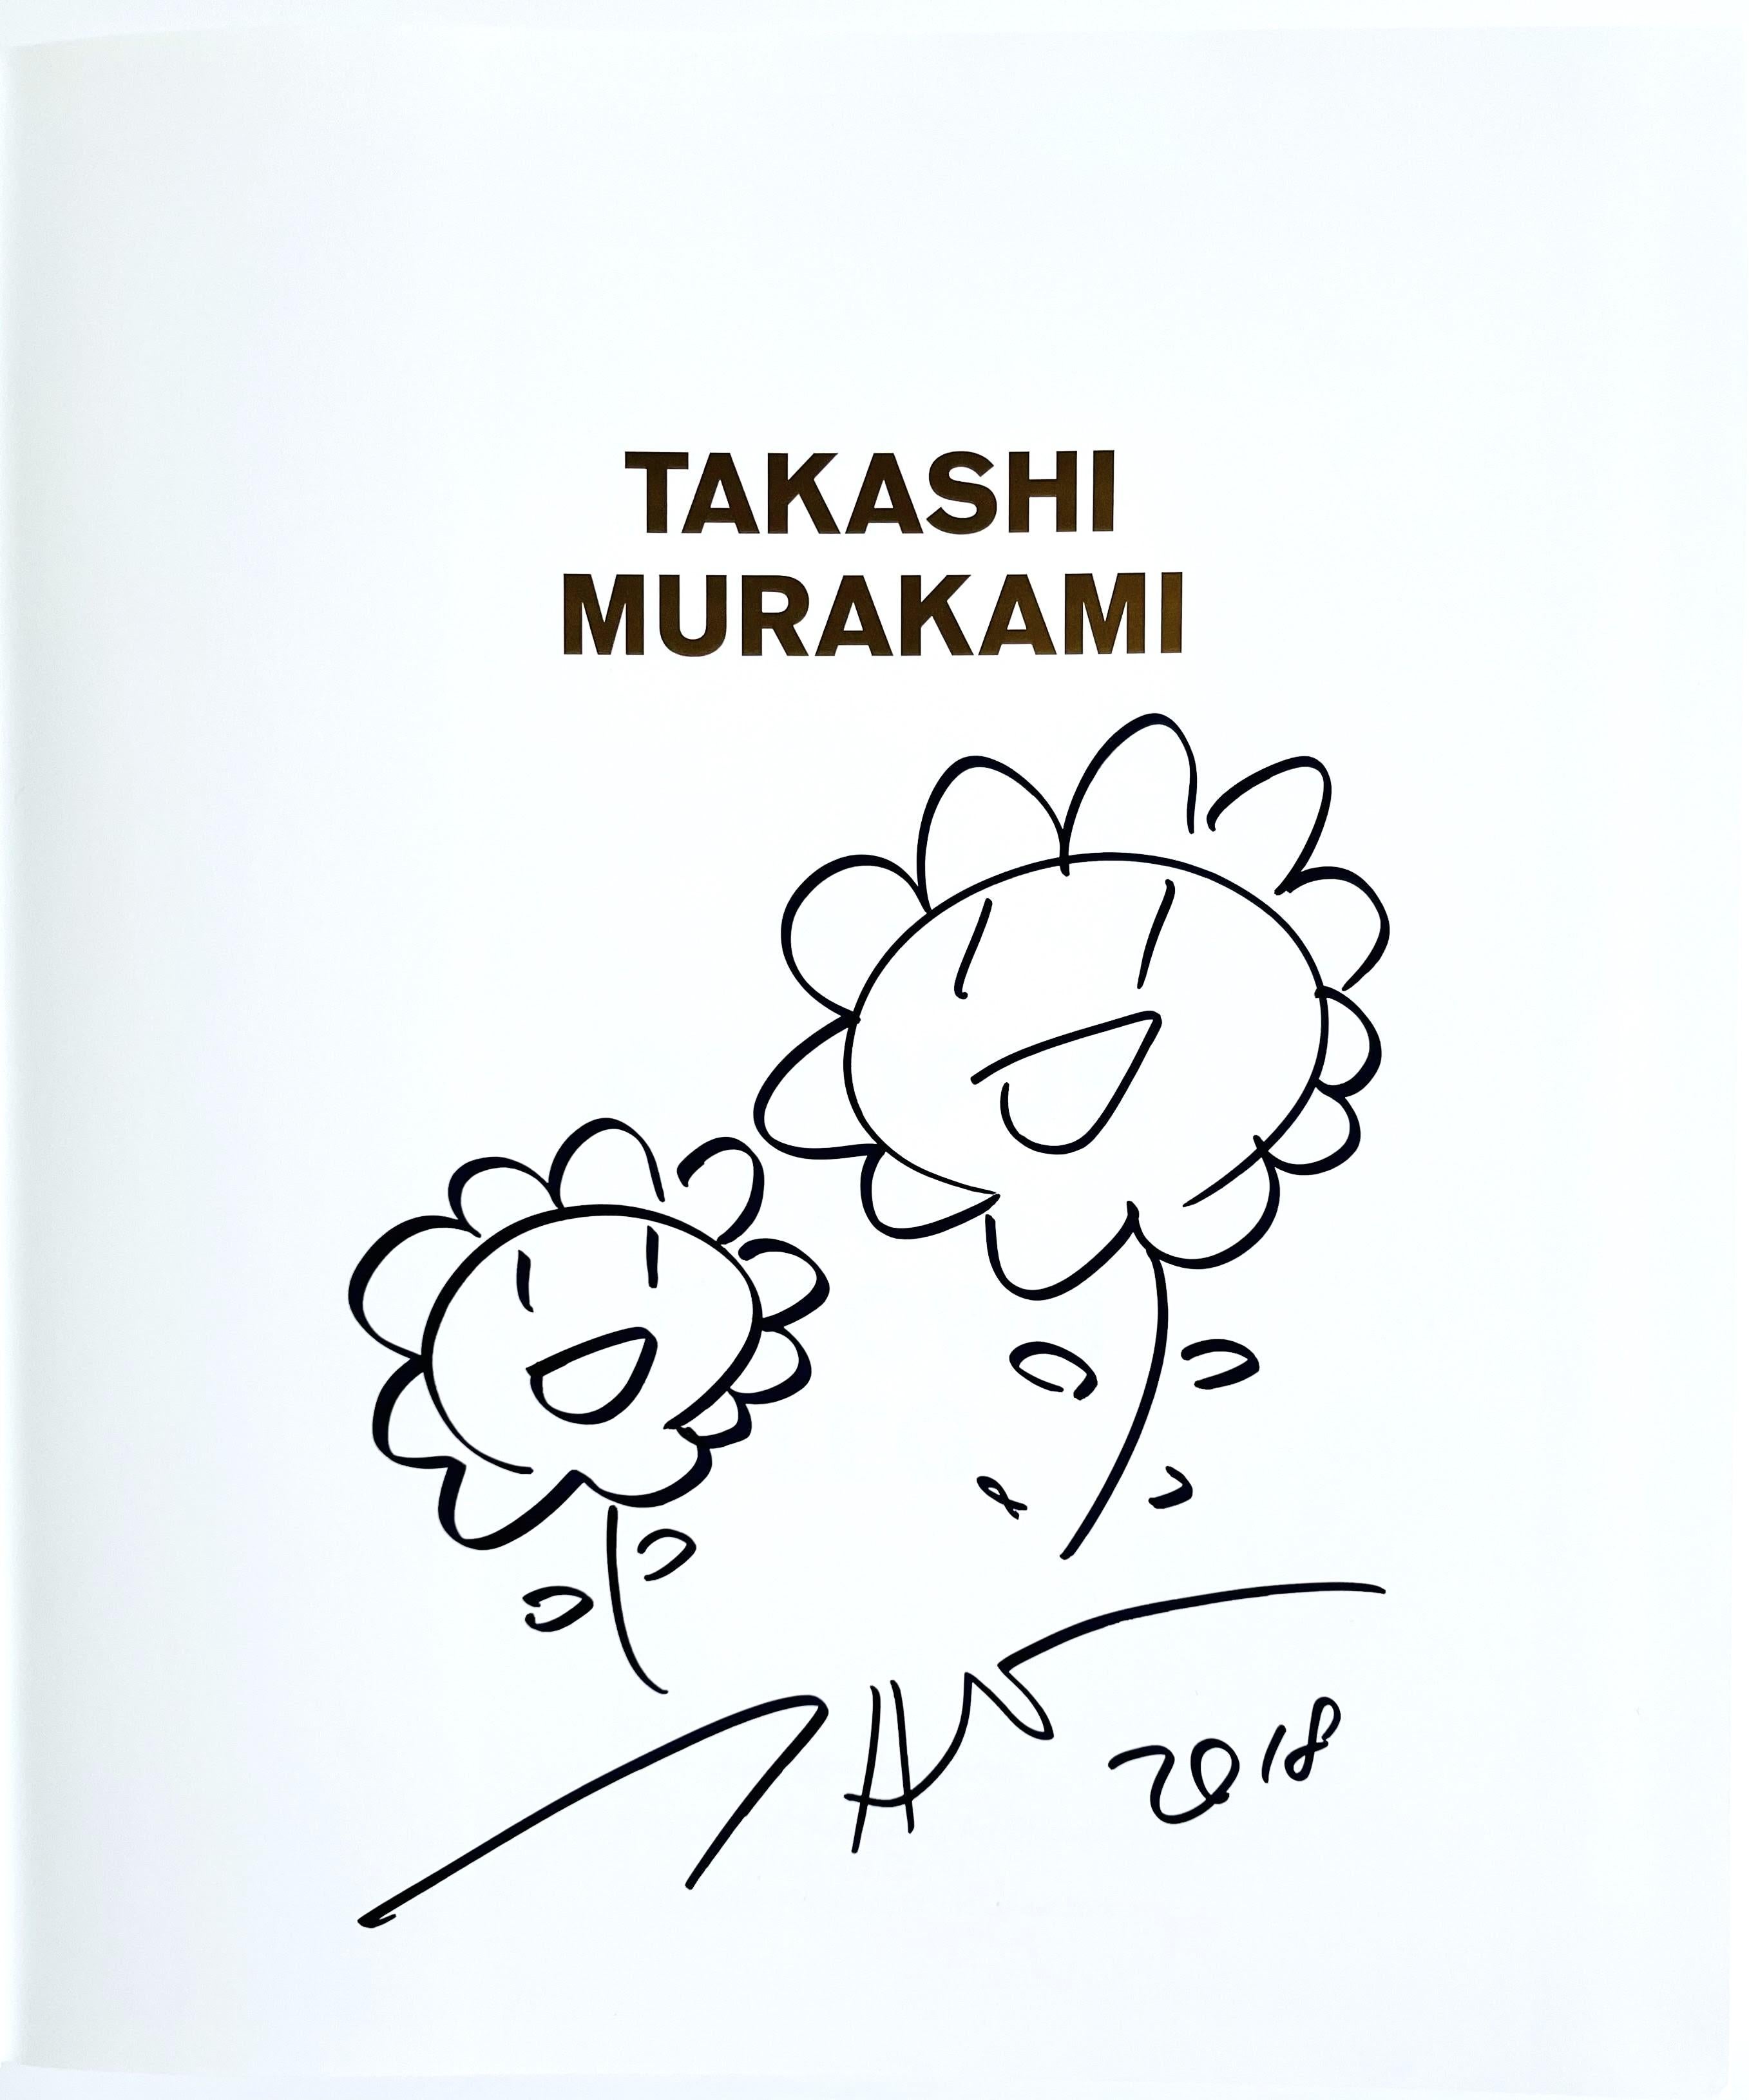 Takashi Murakami
Unique drawing (Two Flowers) created for the Modern Art Museum, Ft. Worth, Texas, 2018
Original drawing done in marker, and bound on title page of hardback monograph
Signed by Murakami directly underneath the drawing
11 × 9 1/2